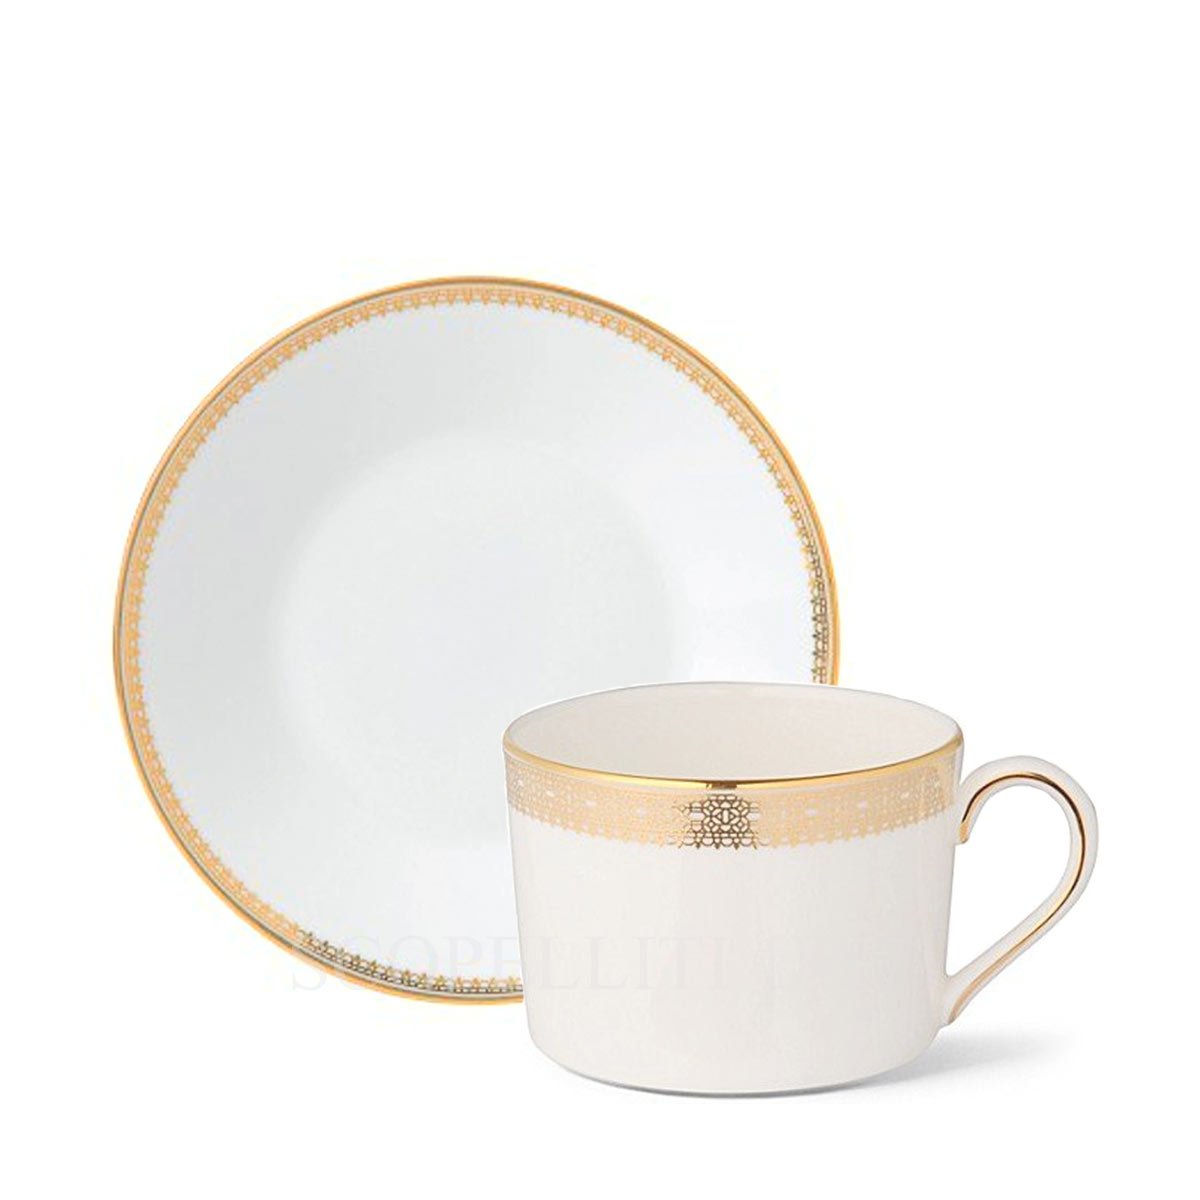 Wedgwood Vera Wang Lace Gold Teacup with Saucer